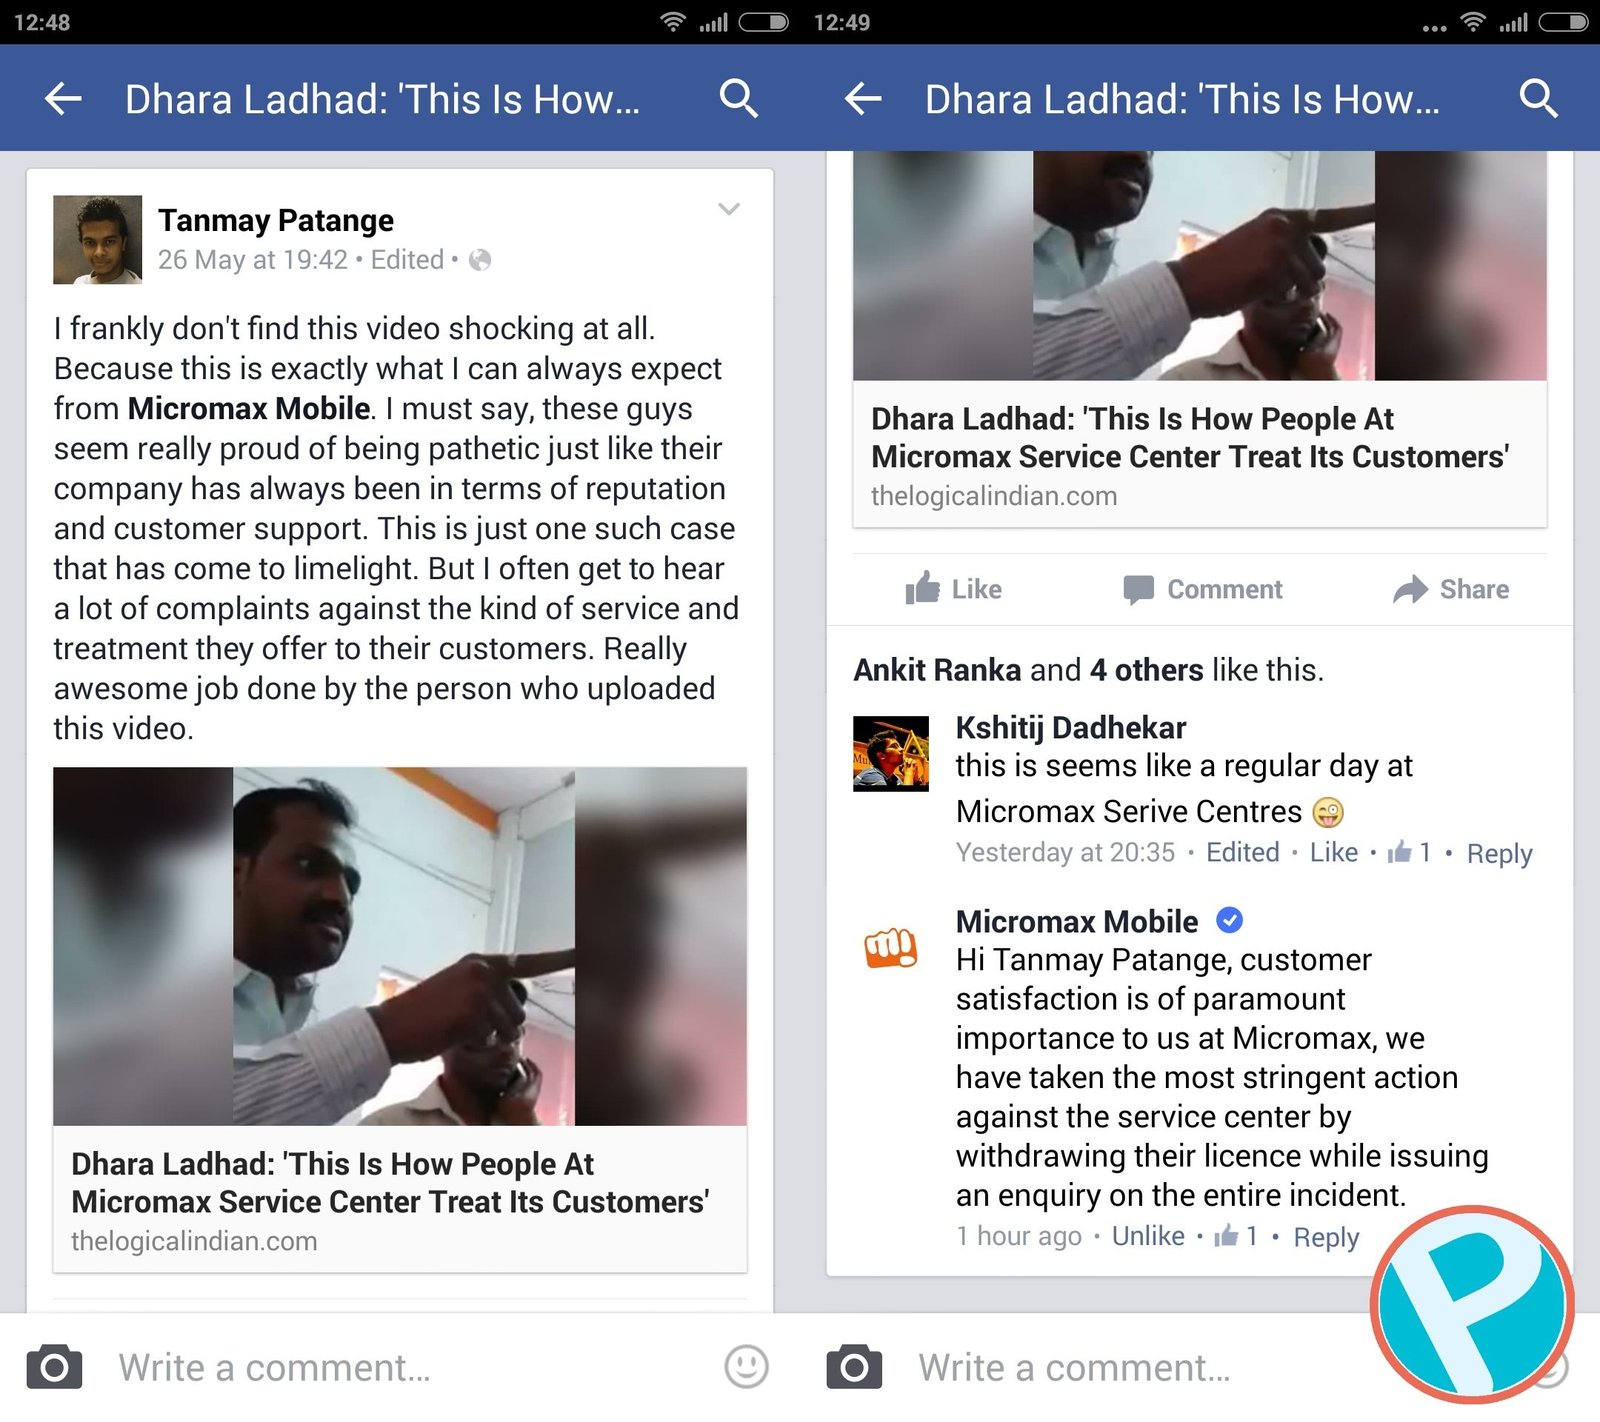 Dhara Ladhad: ‘This Is How People At Micromax Service Center Treat Its Customers’